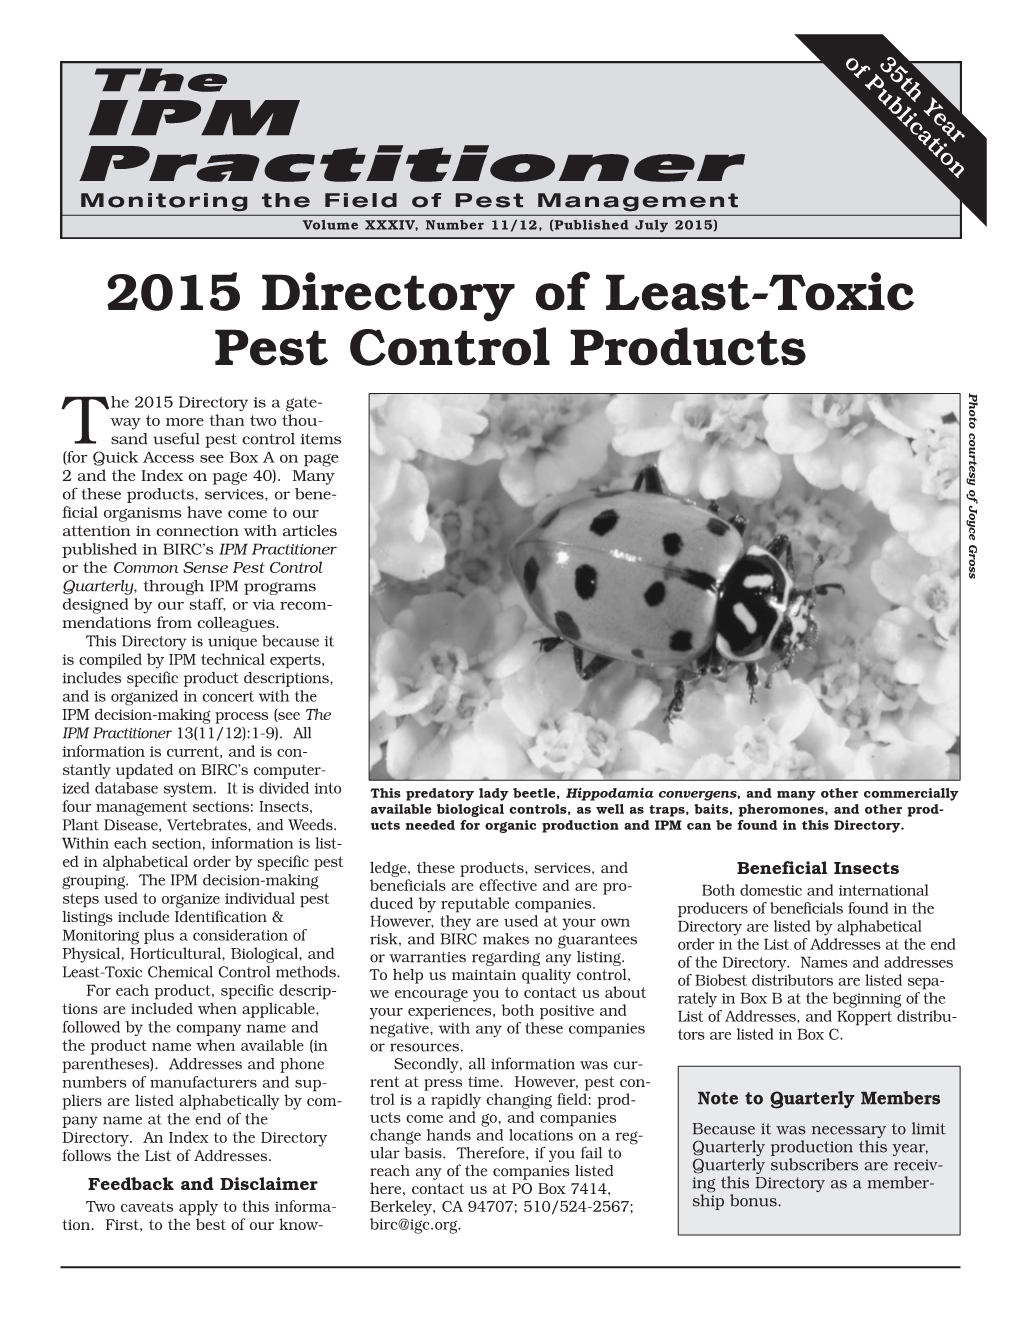 2015 Directory of Least-Toxic Pest Control Products